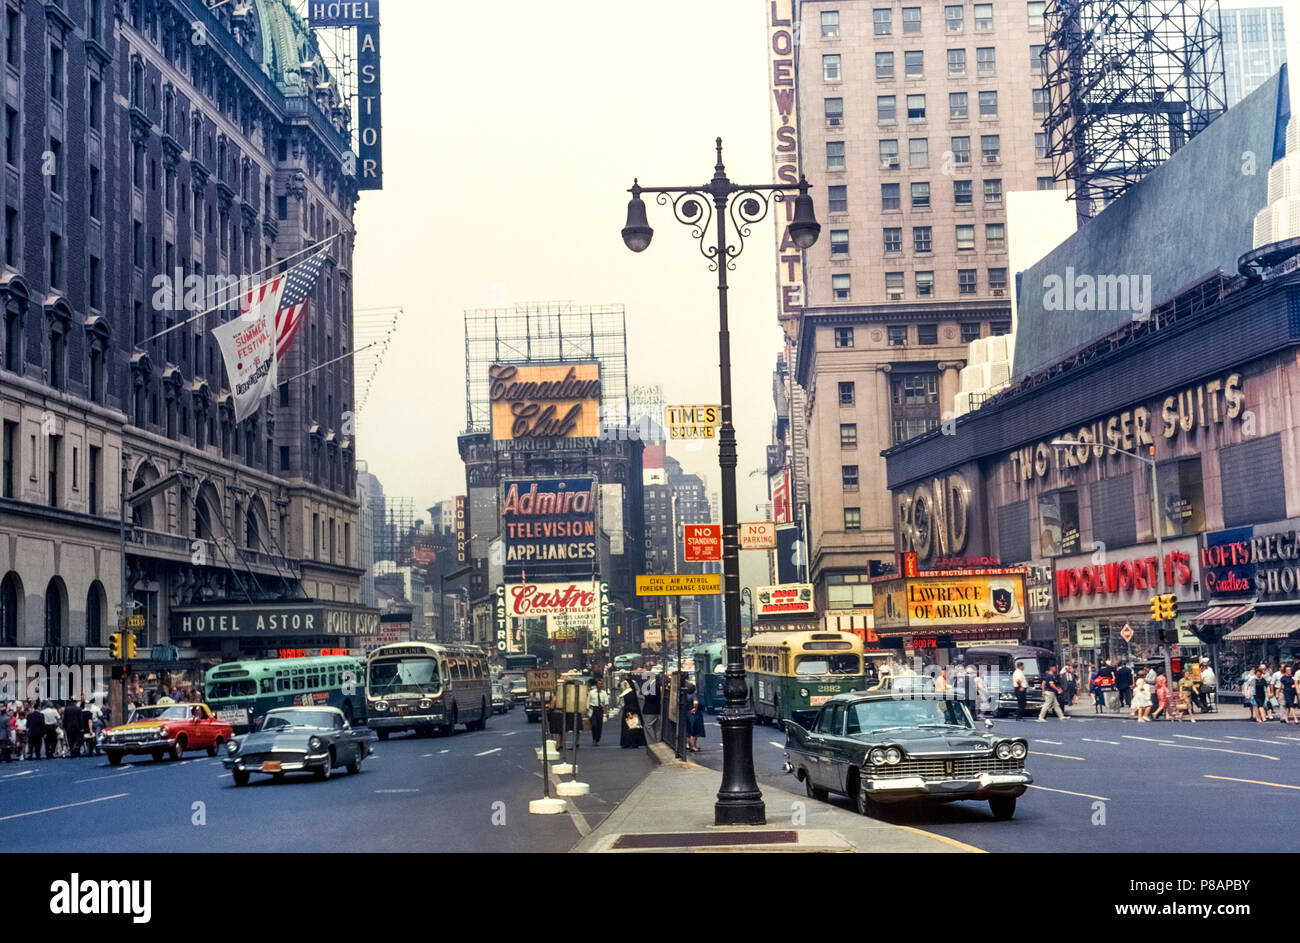 The famed Times Square in New York City, New York, USA, was photographed during the daytime in 1963 prior to its rebirth decades later as the tourist entertainment center that it is today. High-rise office buildings have replaced the 1904 Hotel Astor (left) and 1921 Lowe’s State Theater (right) while the vintage stores have become home to brand-name retailers, restaurants, and family attractions. Flashy digital and neon signs and billboards dominate the lively pedestrian scene that now draws an estimated 50 million visitors a year to this part of Midtown Manhattan. Historical photograph. Stock Photo